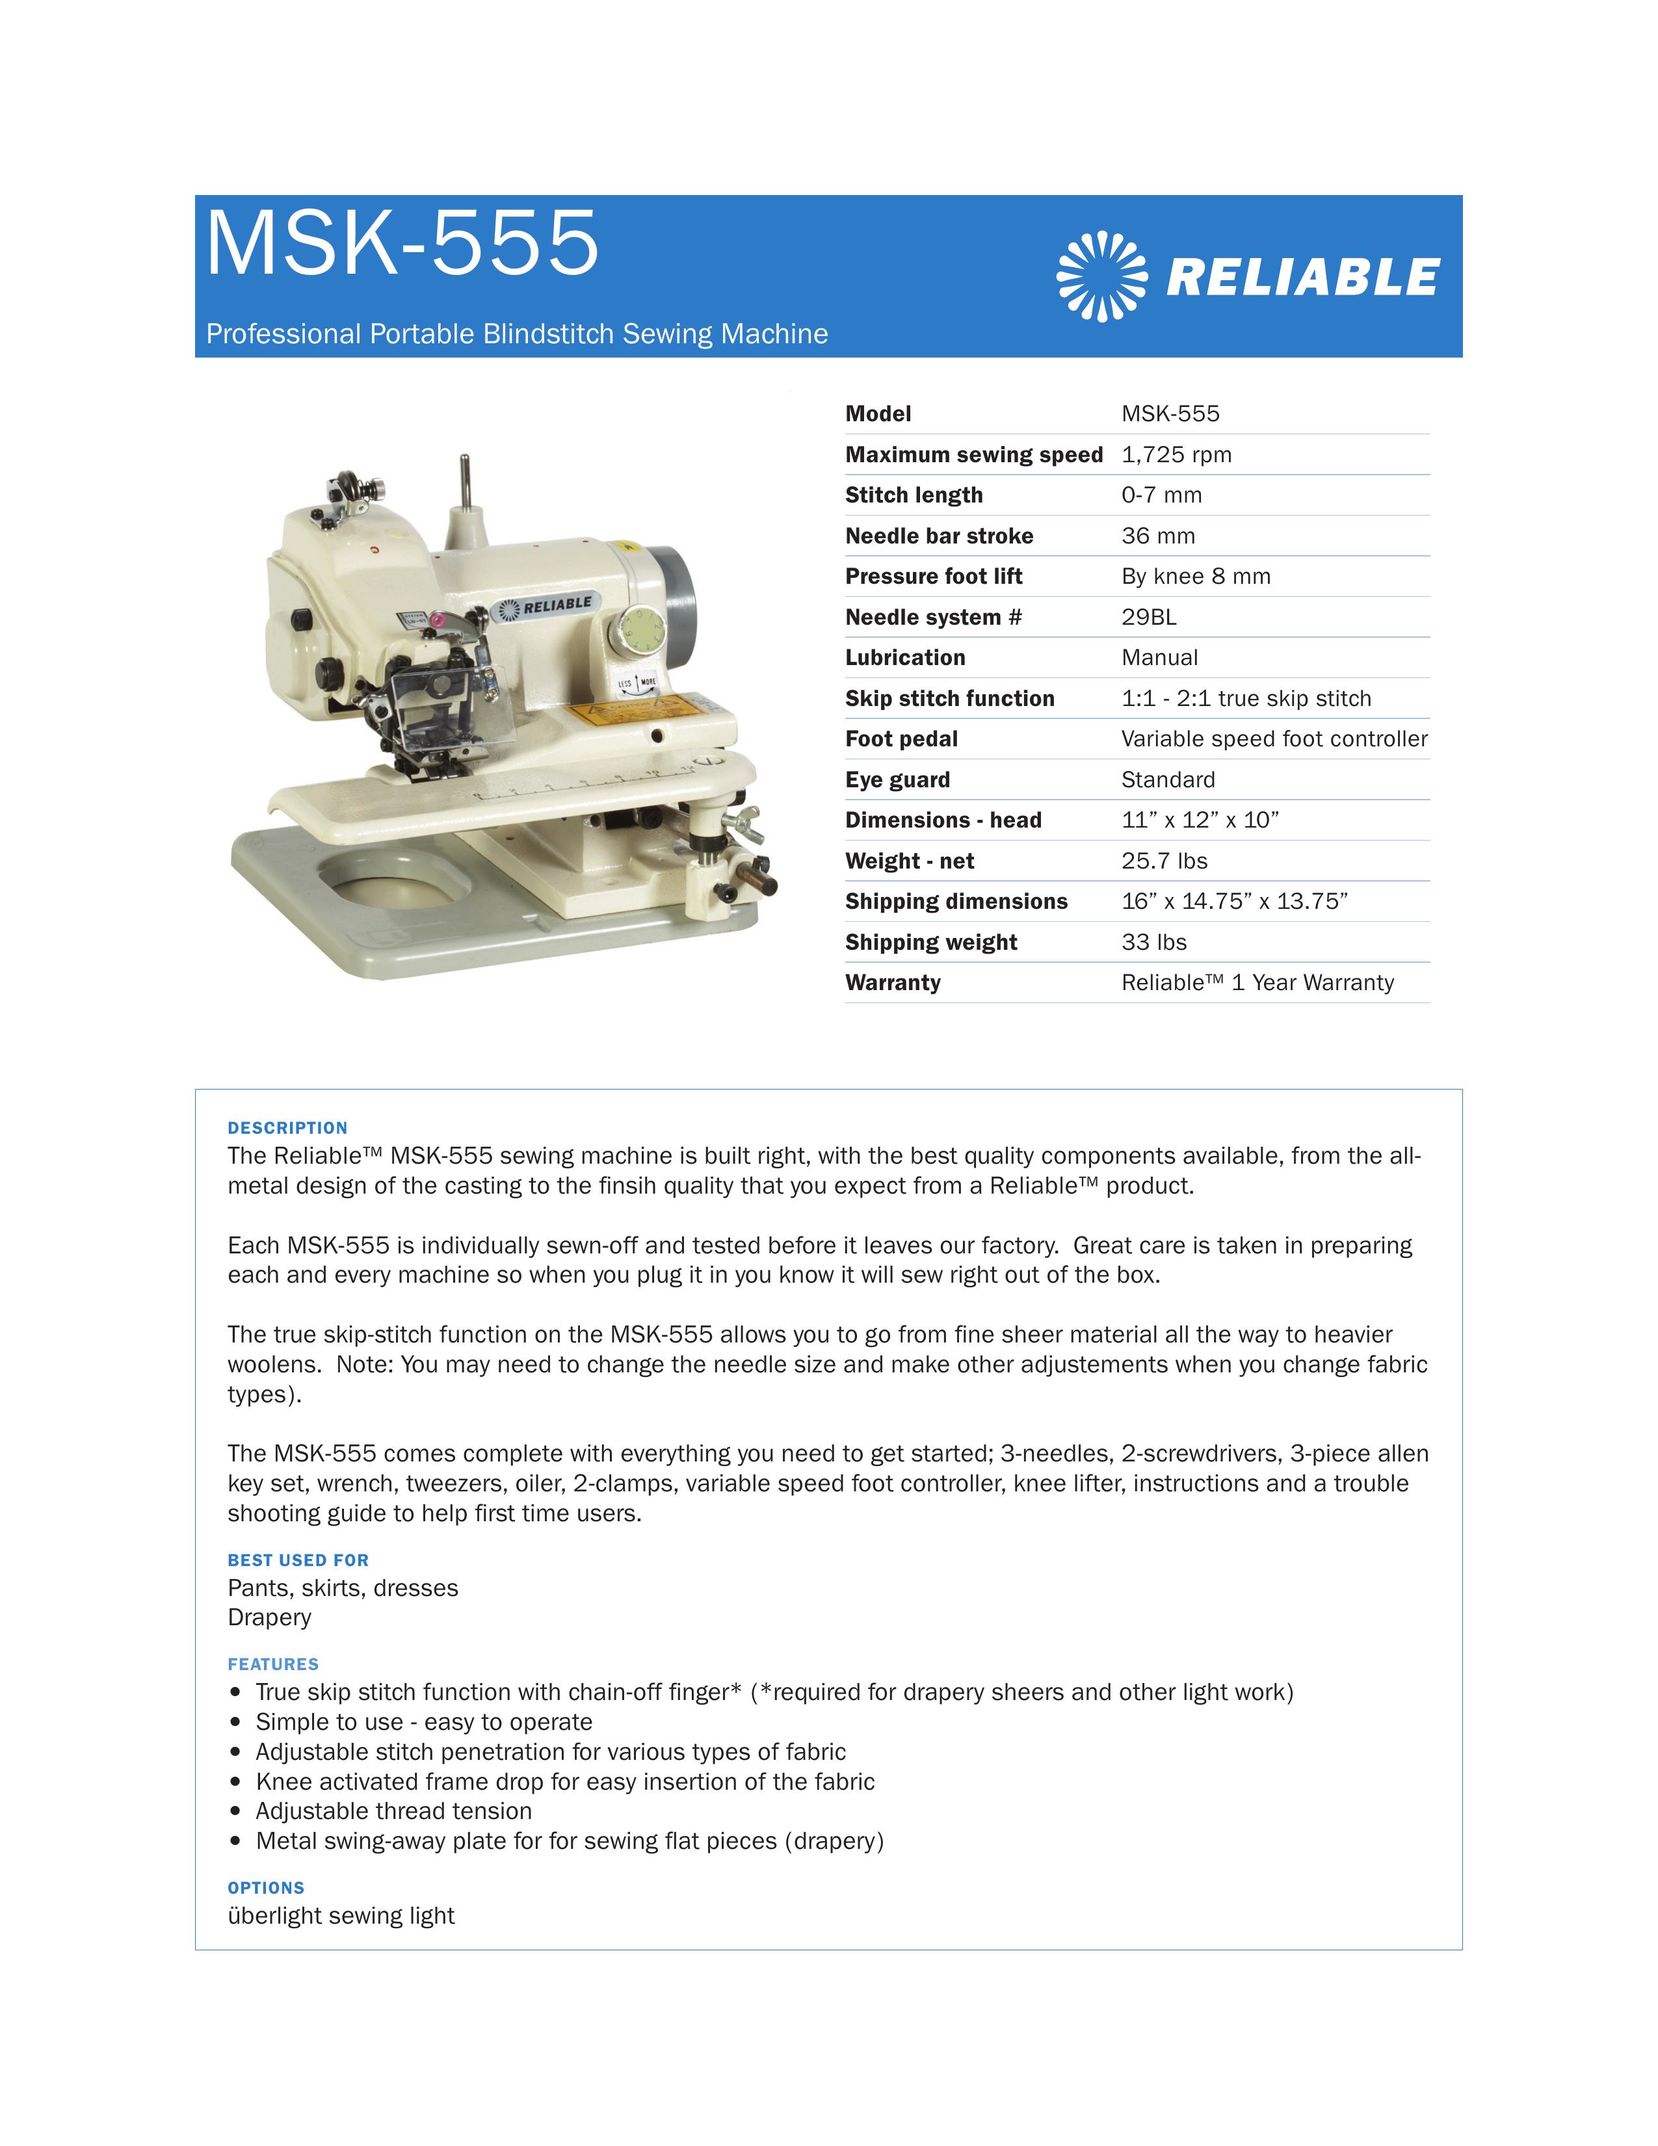 Reliable MSK-555 Sewing Machine User Manual